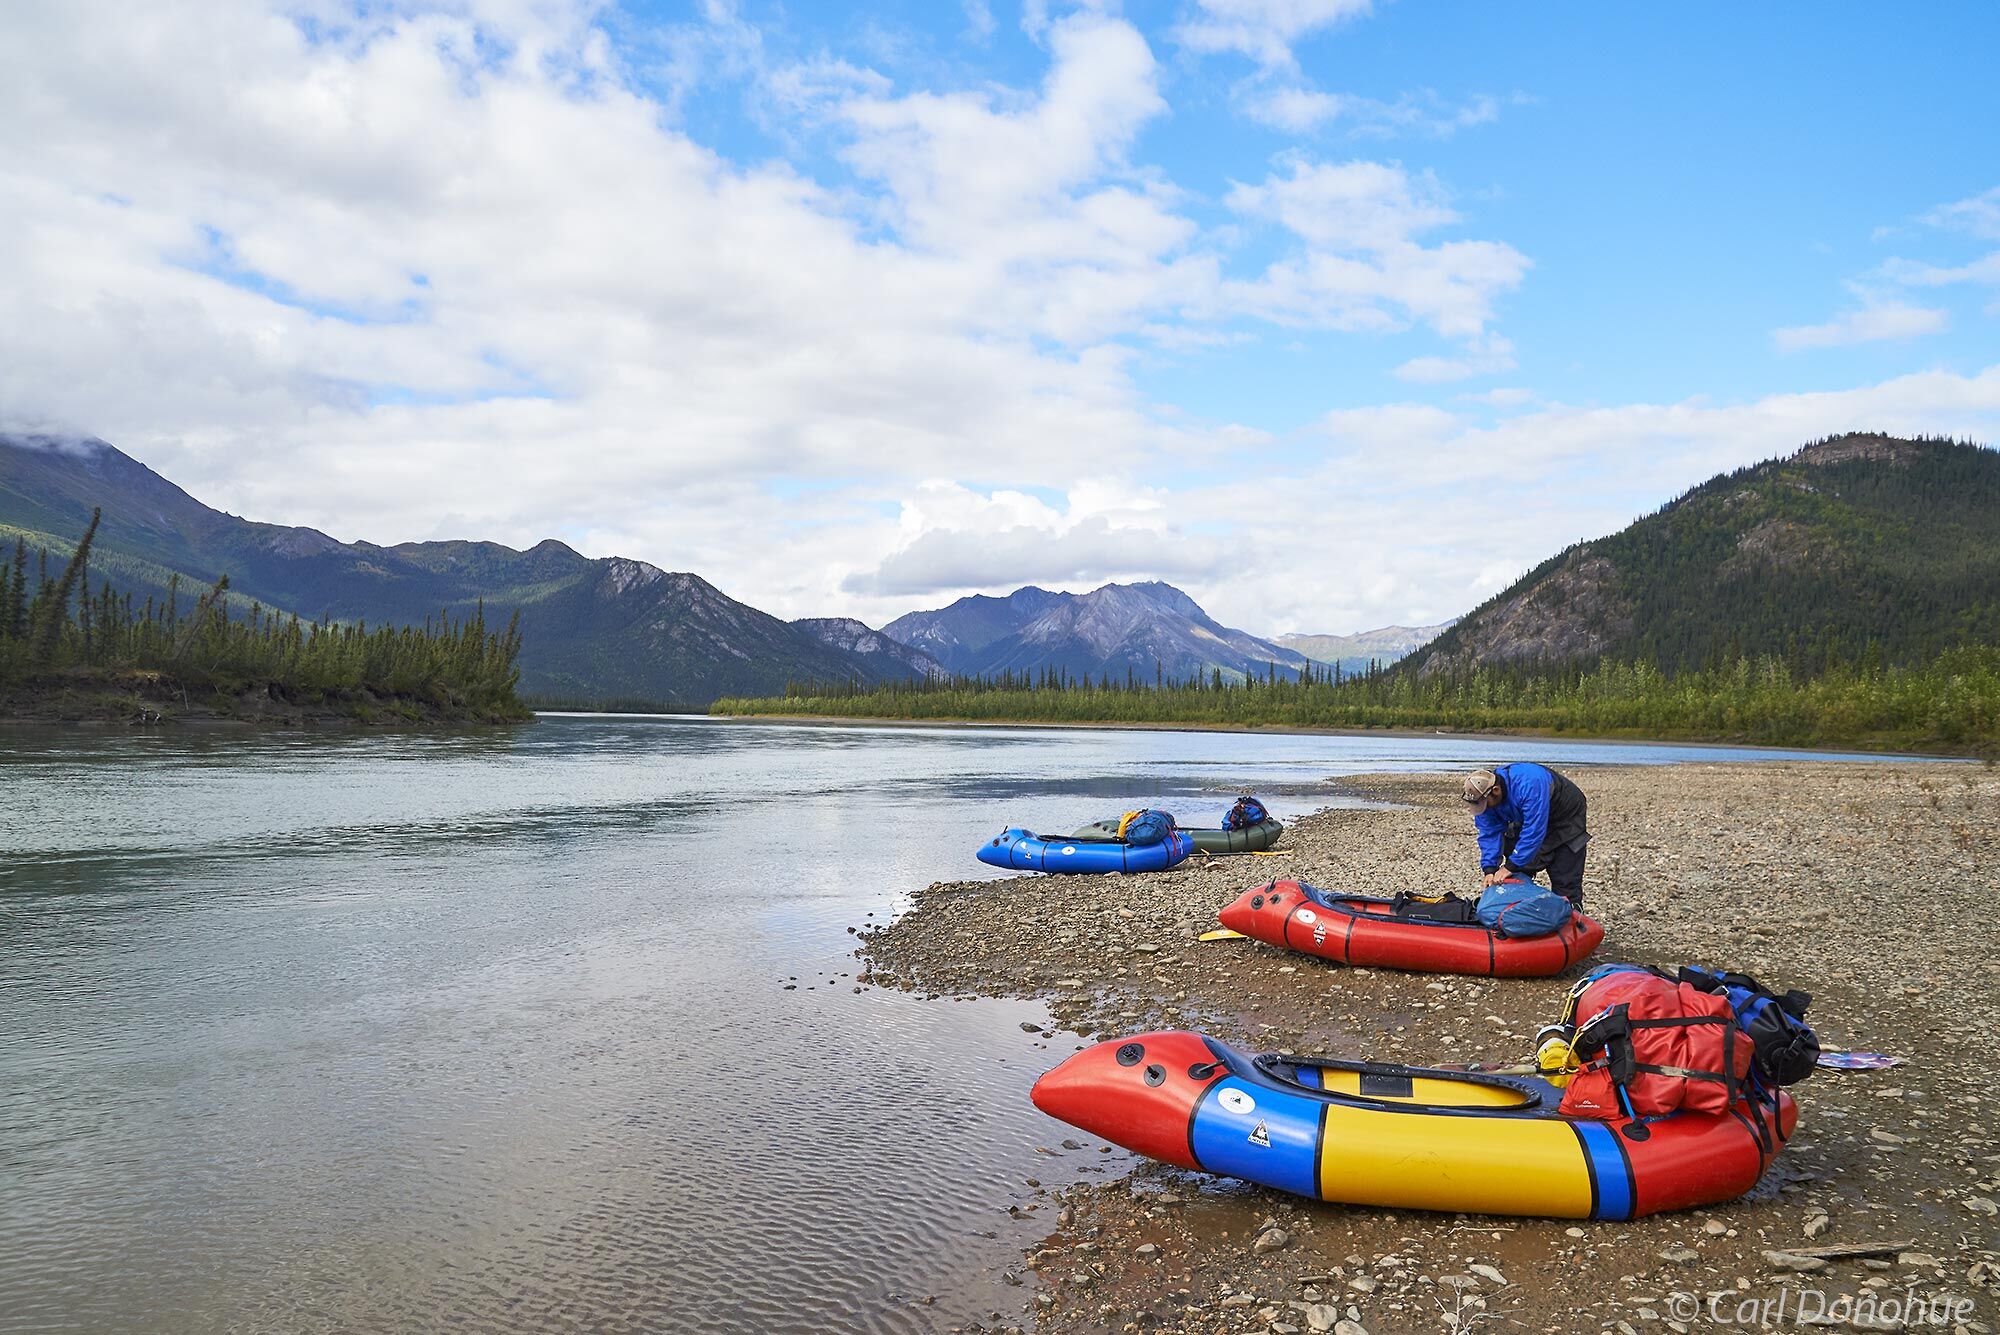 Loading up for a packrafting trip on Alatna River, Gates of the Arctic National Park and Preserve, Alaska.